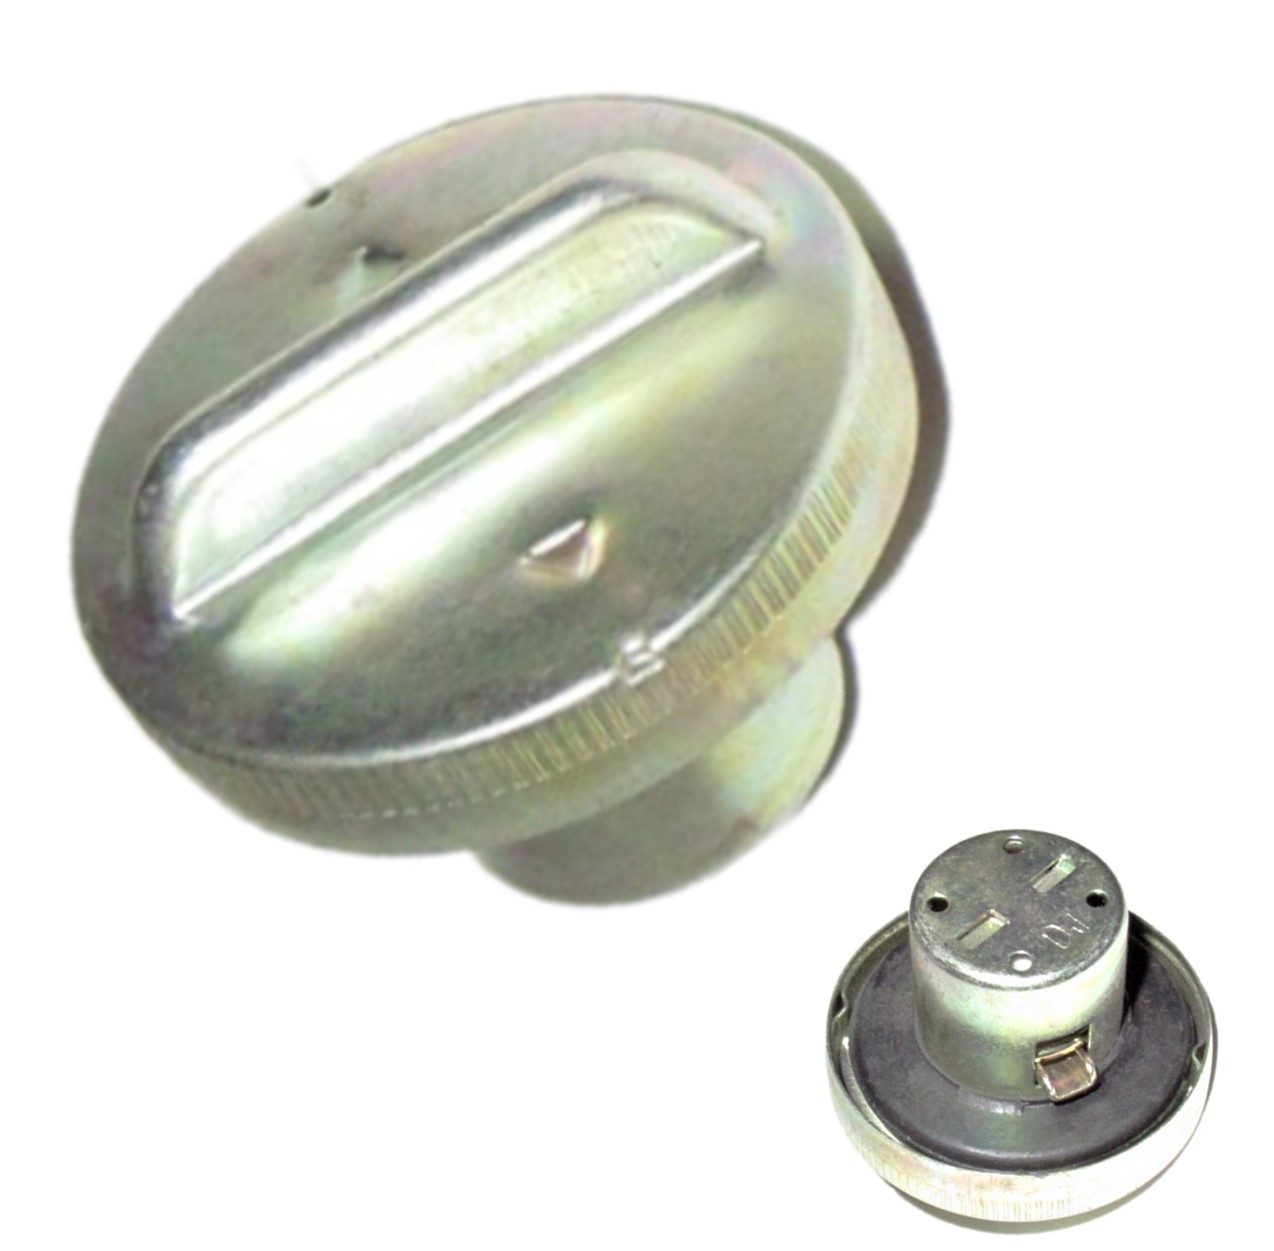 GAS CAP w/Turn Tab Inner Shaft=30mm, Top OD=55mm Fits Many Taiwan and Chinese 49-149cc Scooters, ATVs & Dirt Bikes. - Click Image to Close